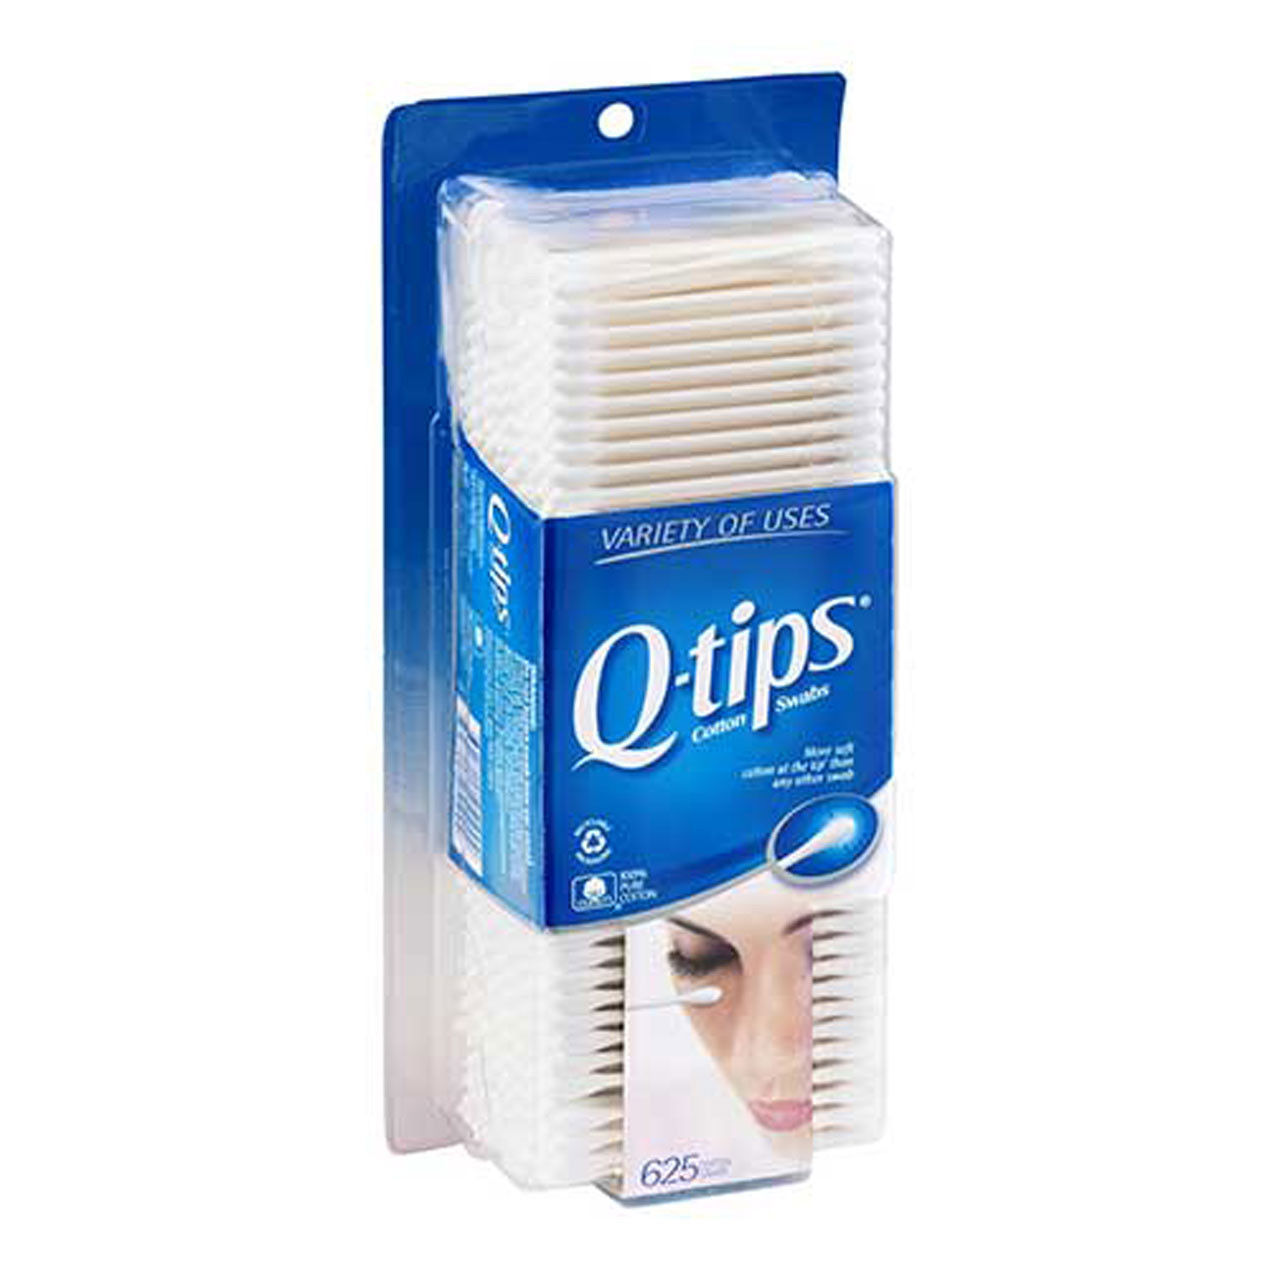 Can I use Q-Tips safety swabs, family size, 625 ct (pack of 2) in spas?